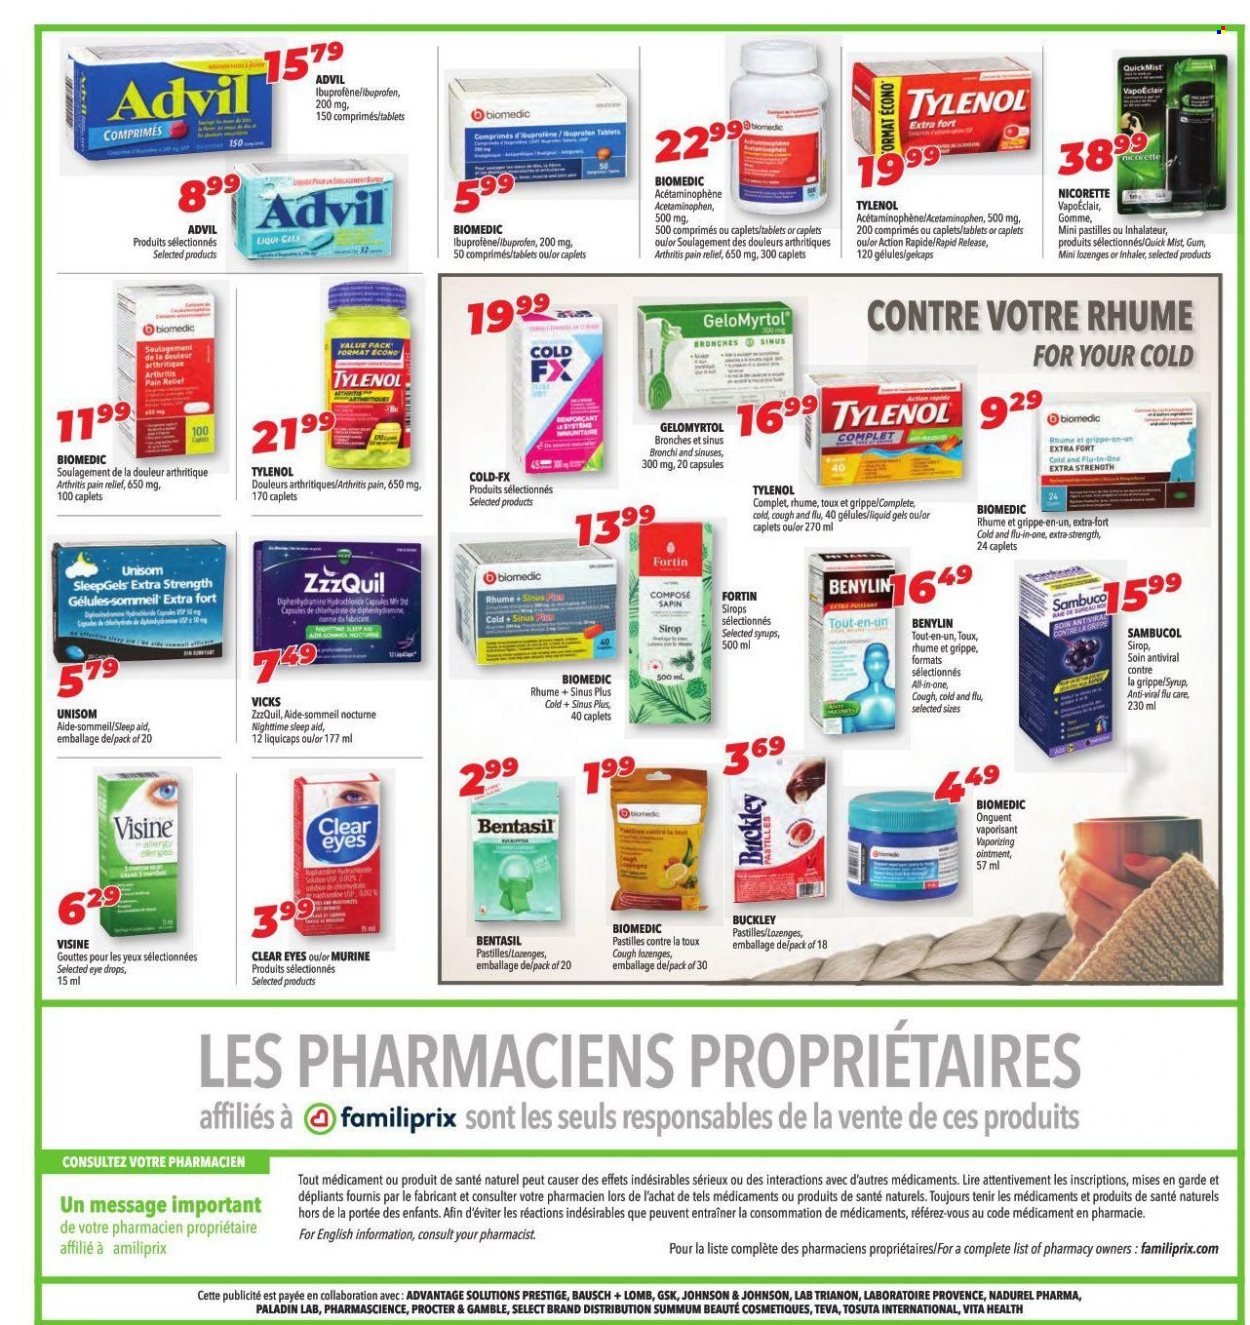 thumbnail - Familiprix Extra Flyer - March 23, 2023 - March 29, 2023 - Sales products - pastilles, syrup, Johnson's, ointment, Vicks, pain relief, Nicorette, Tylenol, Unisom, ZzzQuil, Ibuprofen, eye drops, Advil Rapid, Sambucol, Benylin. Page 5.